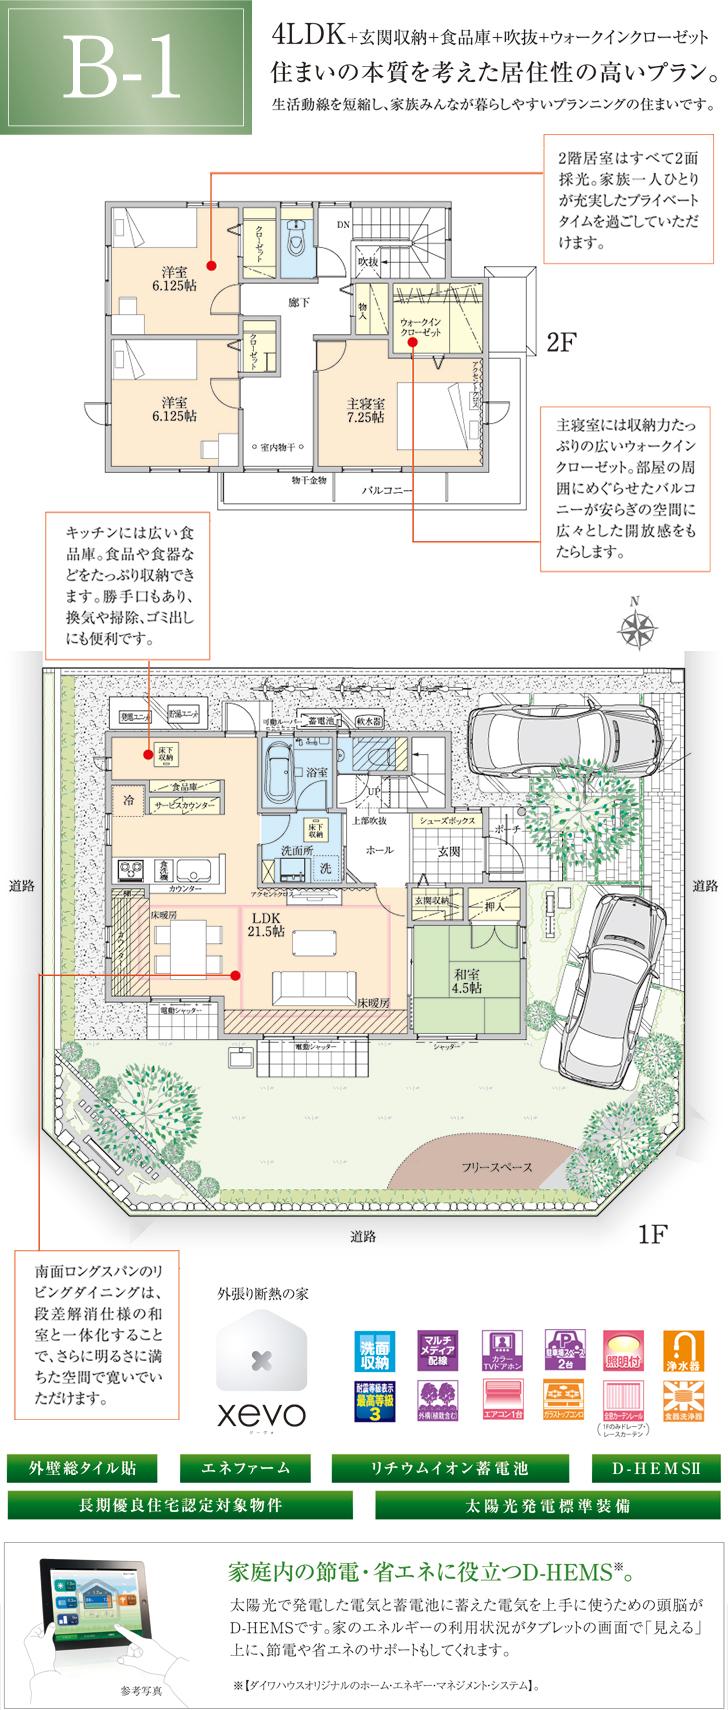 Floor plan.  [B-1 No. land] So we have drawn on the basis of the Plan view] drawings, Plan and the outer structure ・ Planting, etc., It may actually differ slightly from. Also, car ・ bicycle ・ Consumer electronics ・ furniture ・ Fixtures, etc. are not included in the price. 